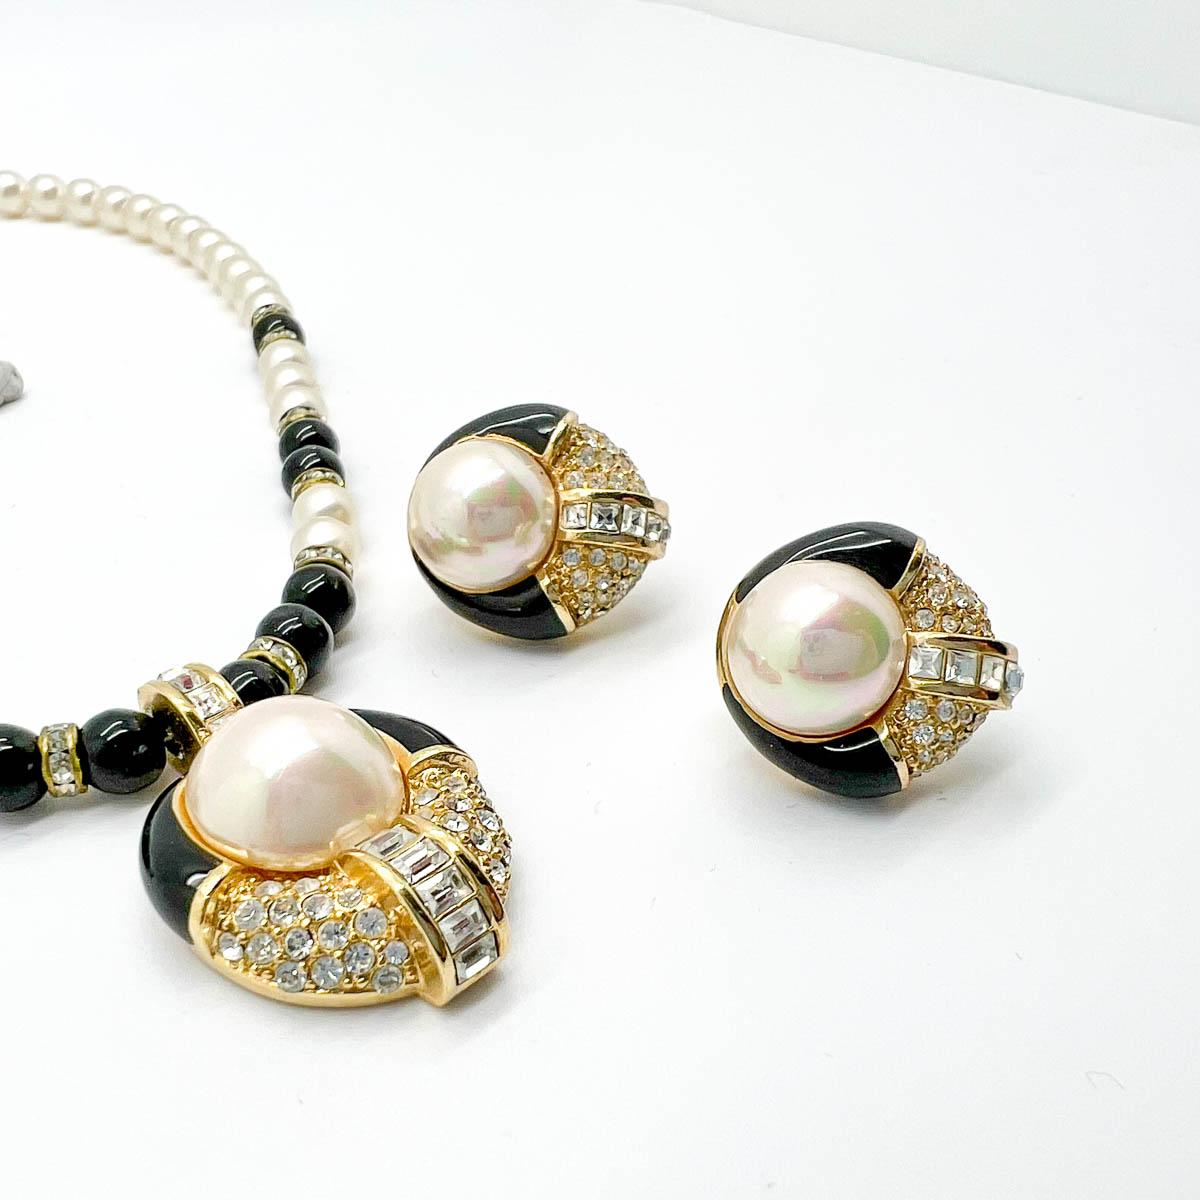 High on style, this Vintage Dior Monochrome Necklace and Earrings embodies the best of Art Deco design. A pure classic from the House of Dior that will never fail to add a touch of timeless elegance.
With archive pieces from her own Dior collection